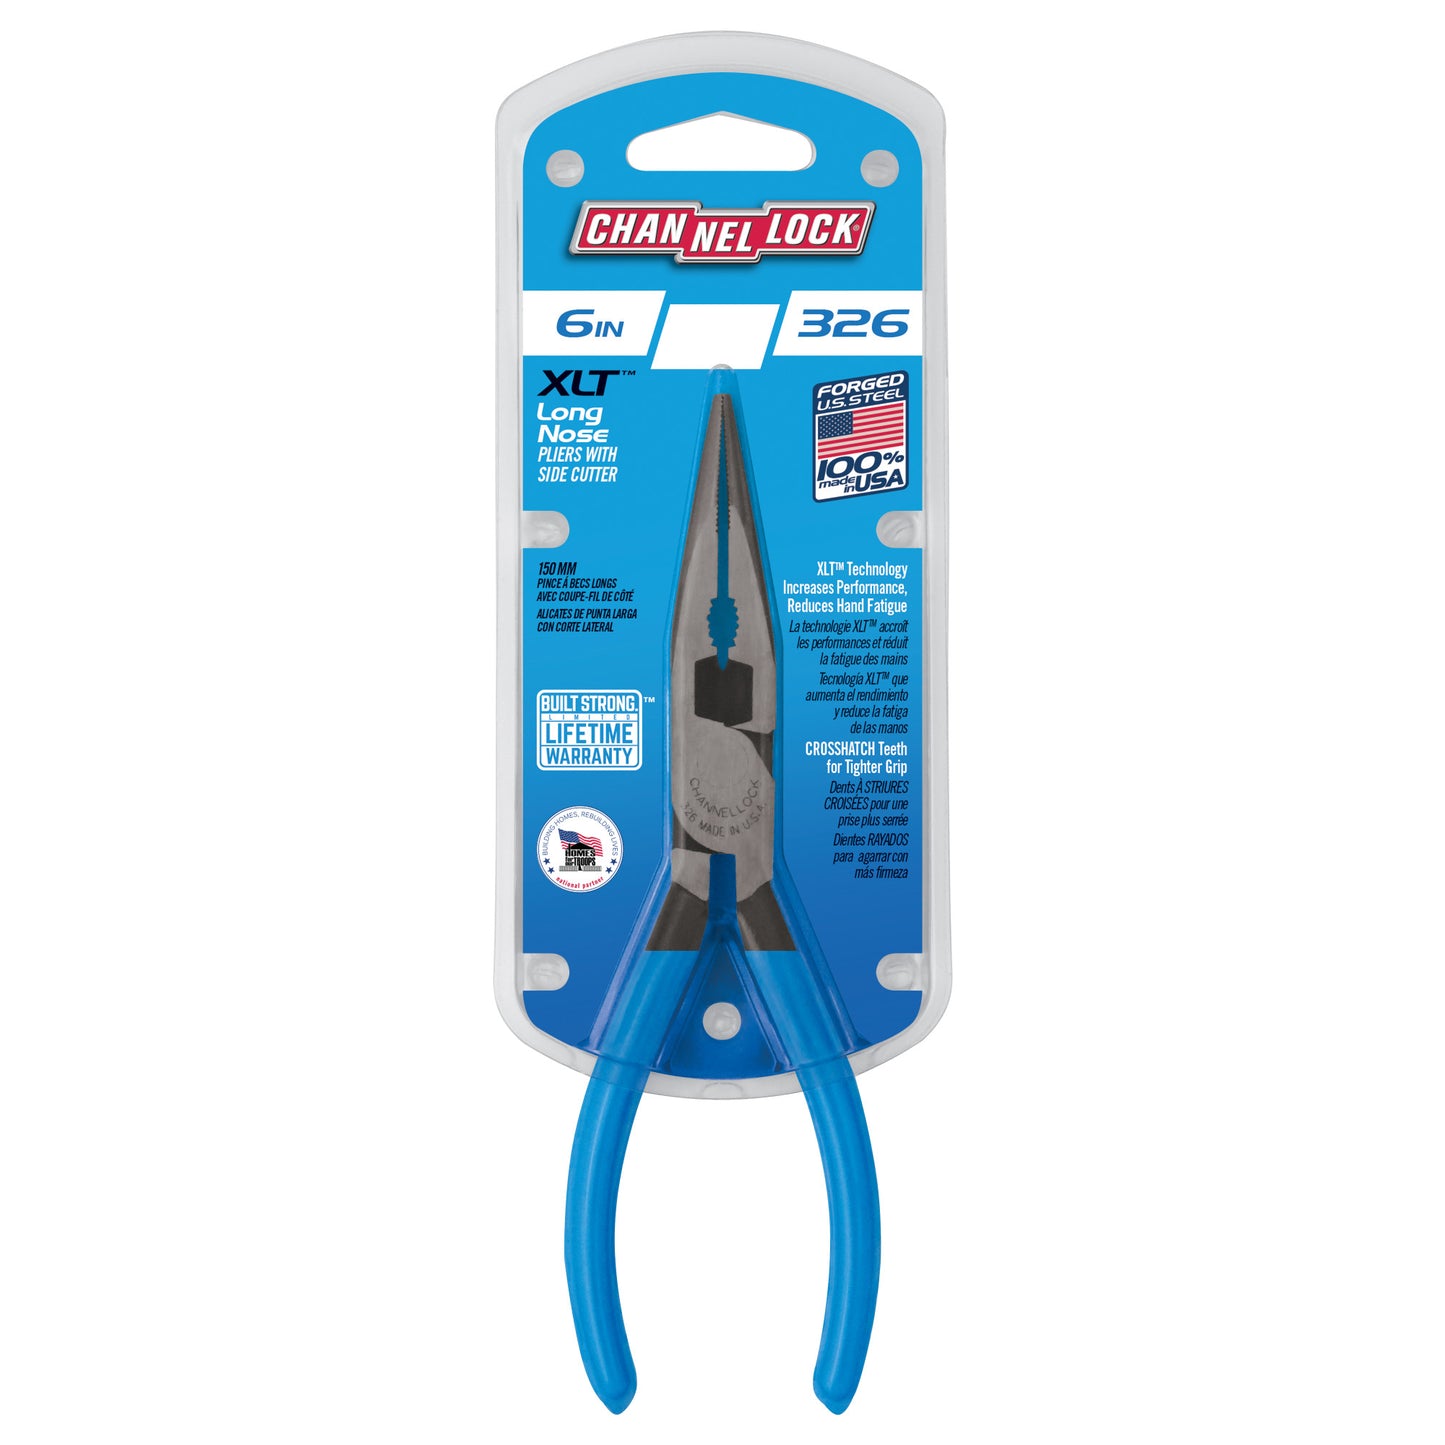 6-inch XLT™ Combination Long Nose Pliers with Cutter (326)